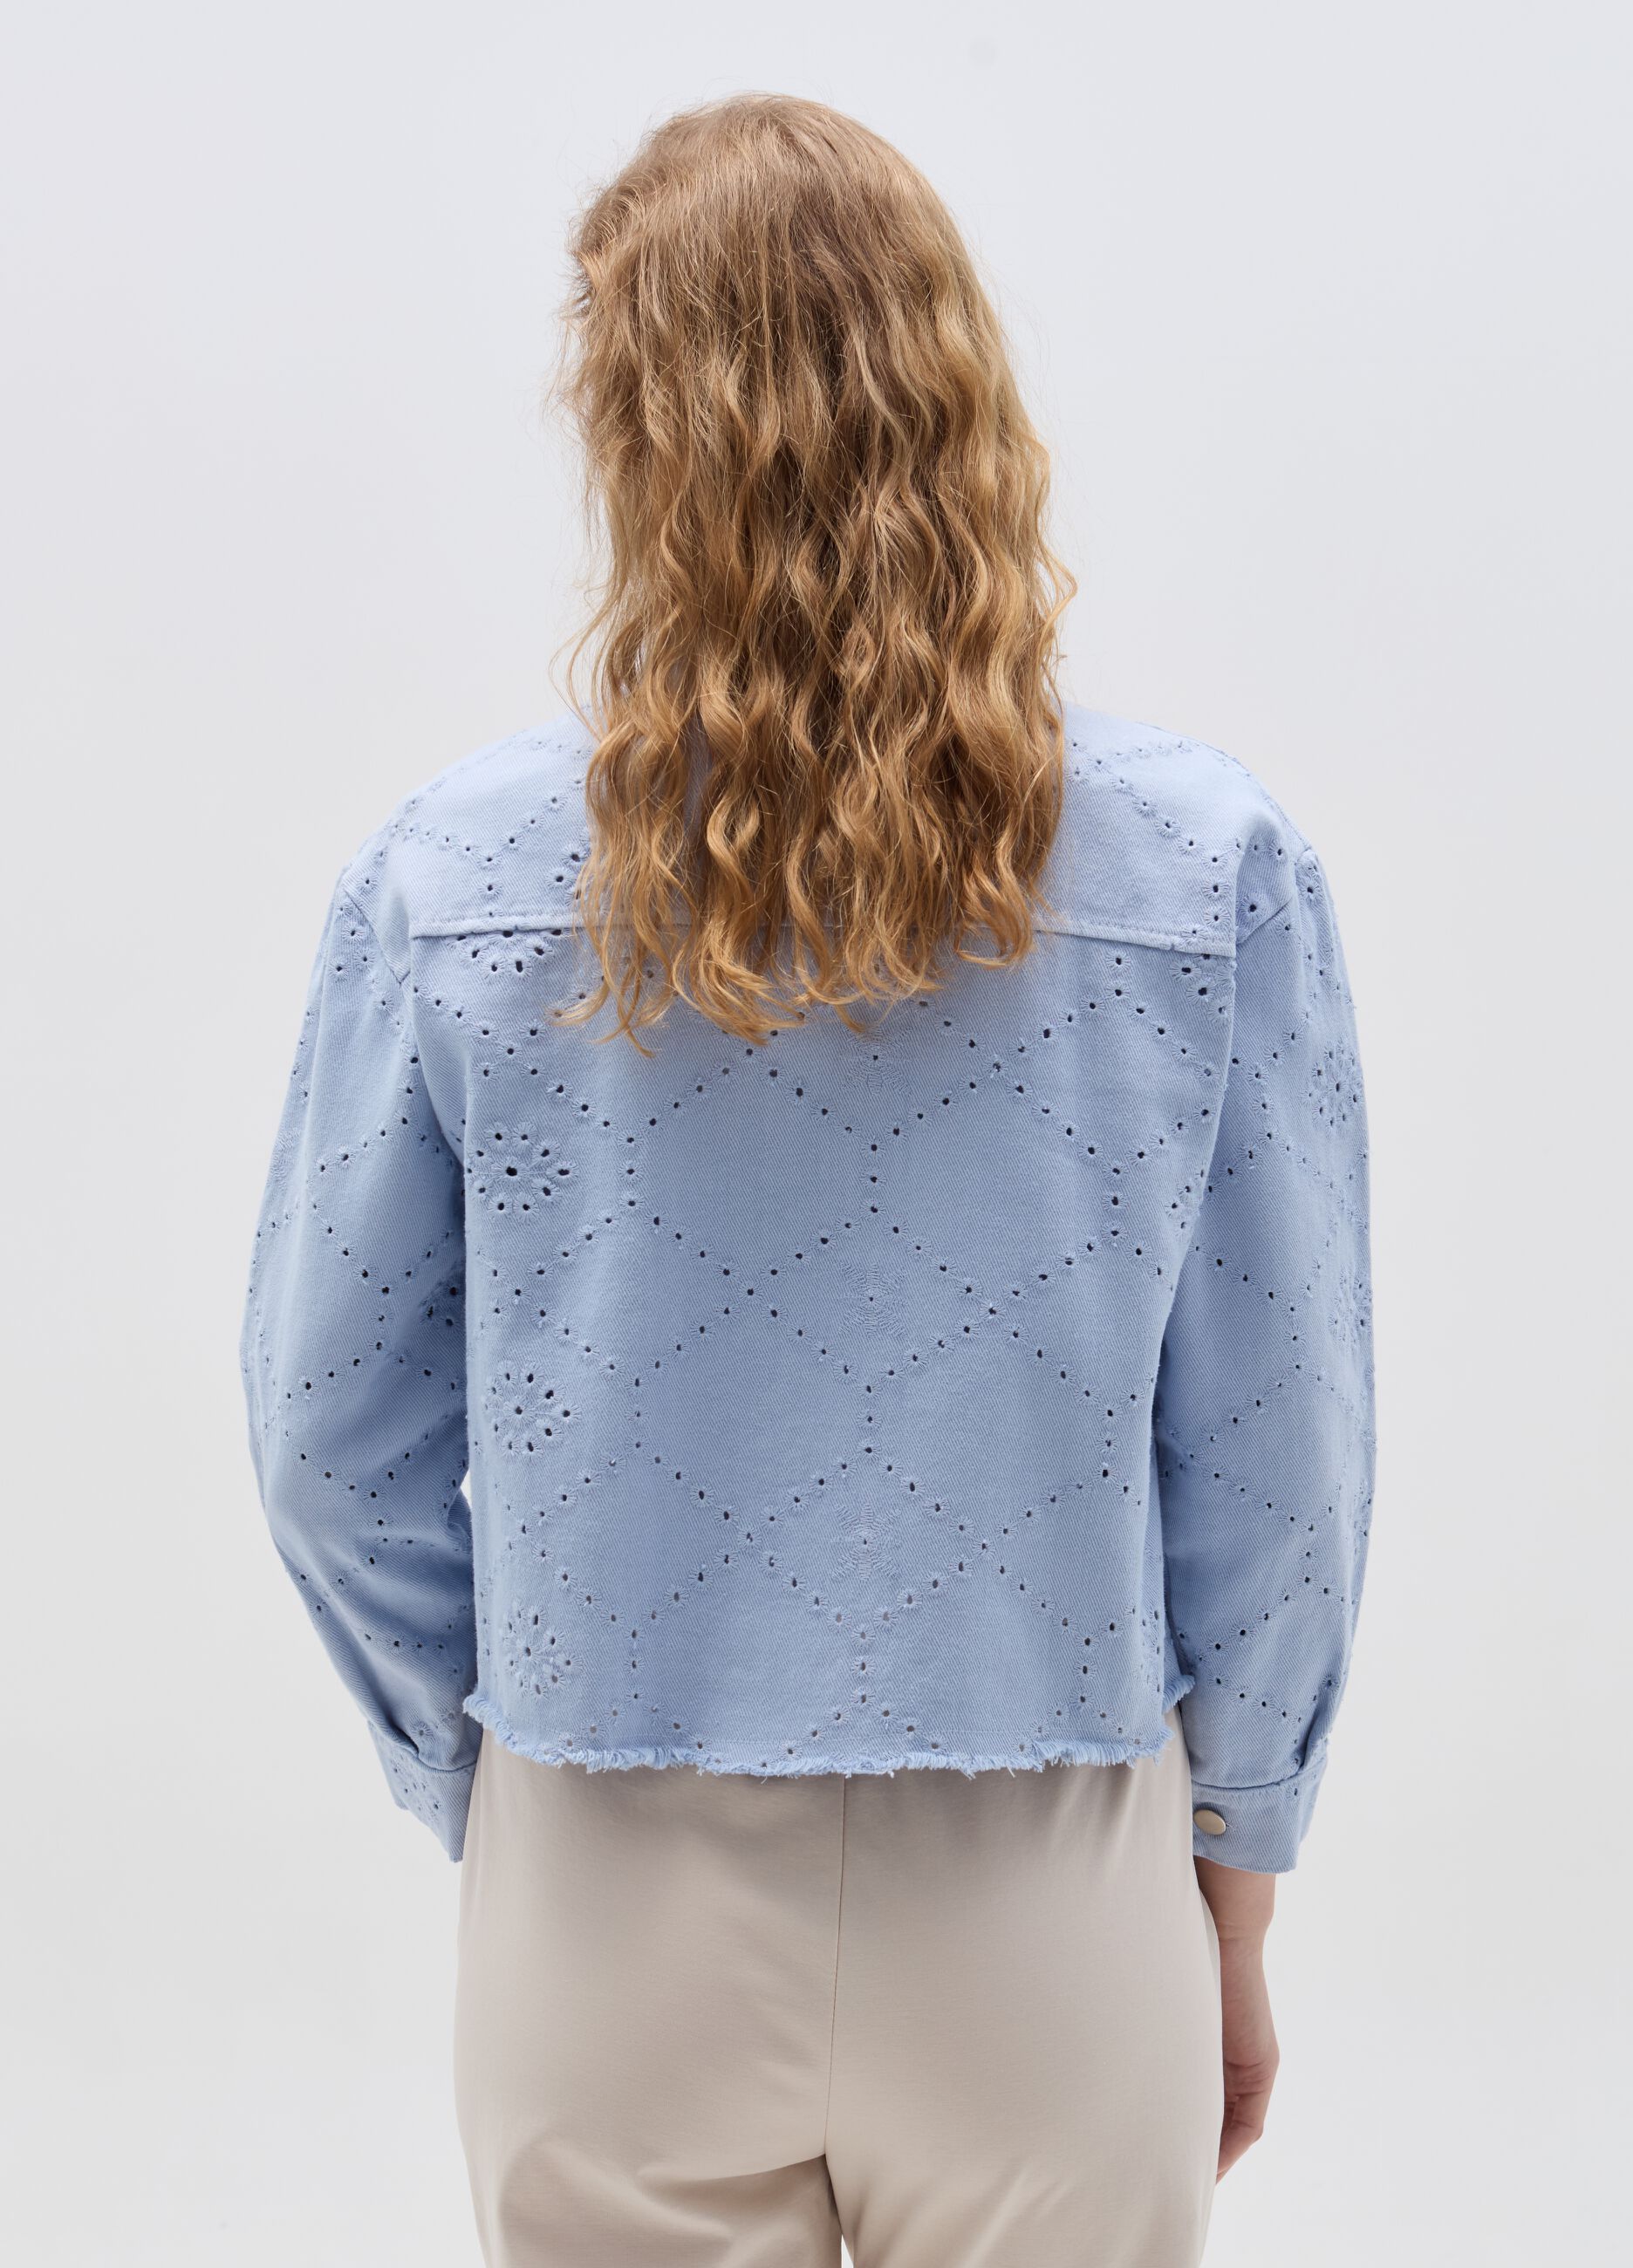 Short jacket with openwork and broderie anglaise details